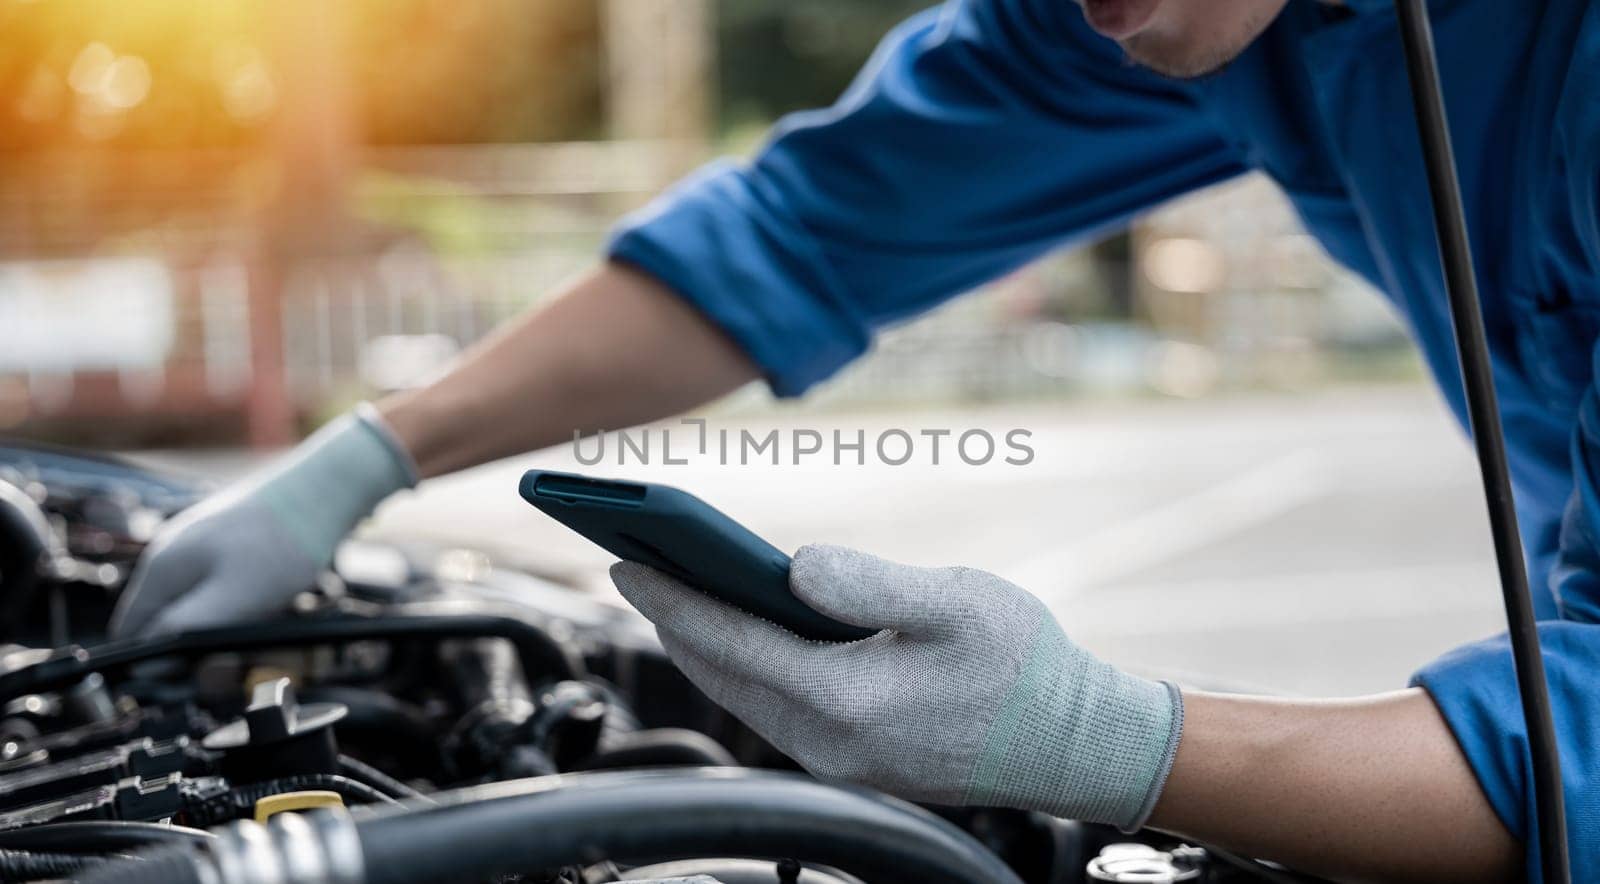 Skilled technician working with determination and pride at car repair station. Close-up shot of mechanic's hand turning wrench on car engine. Horizontal photo with workshop background.